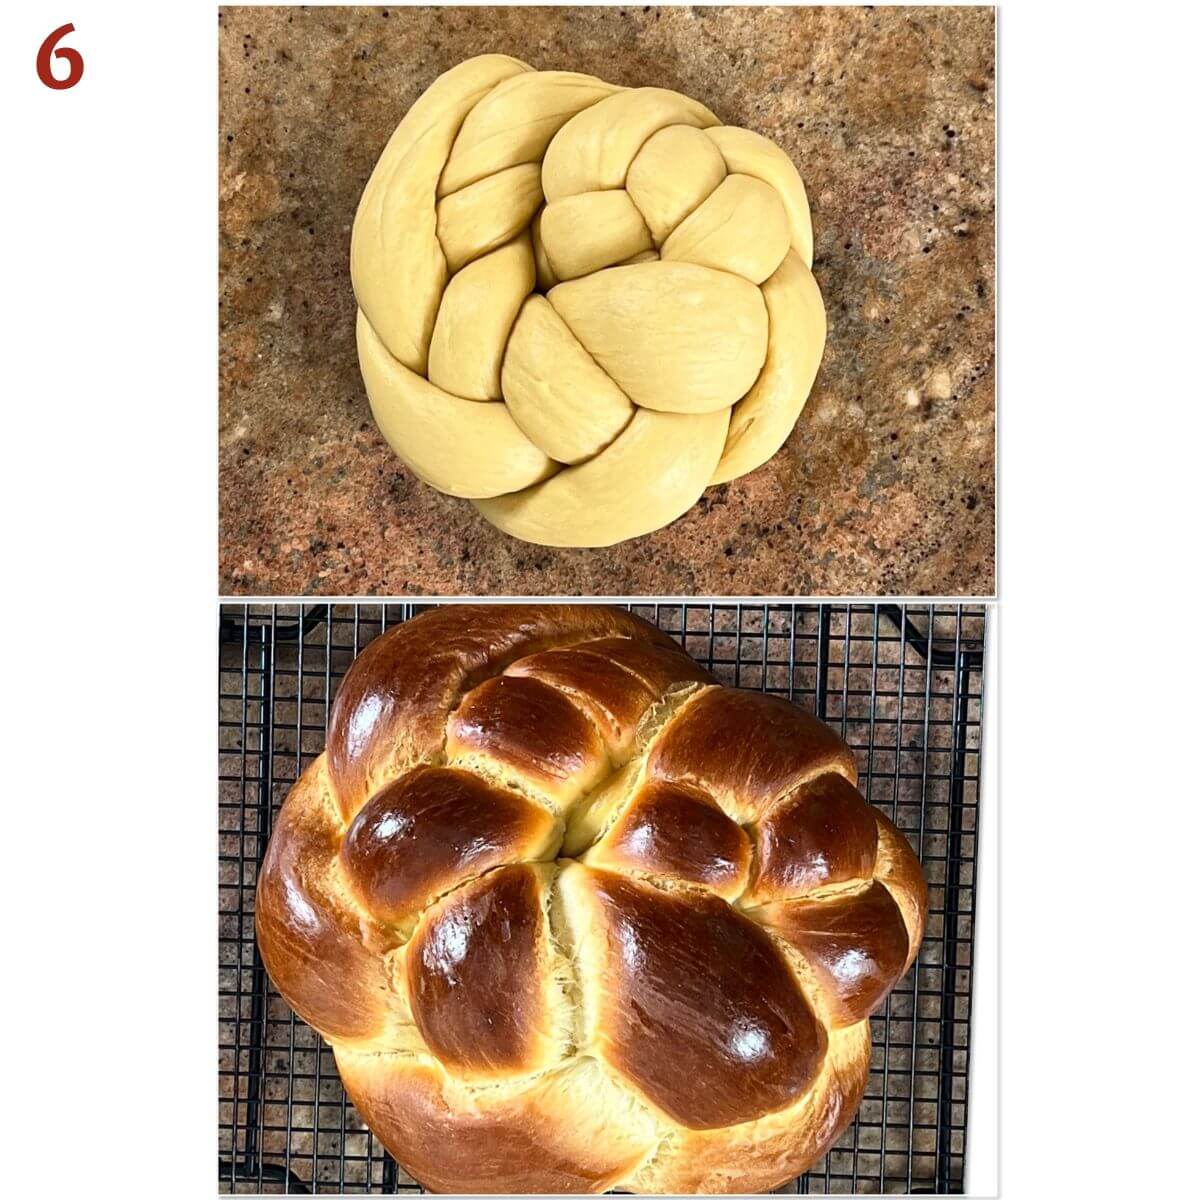 Collage of an three-strand braided spiral round challah before and after baking.